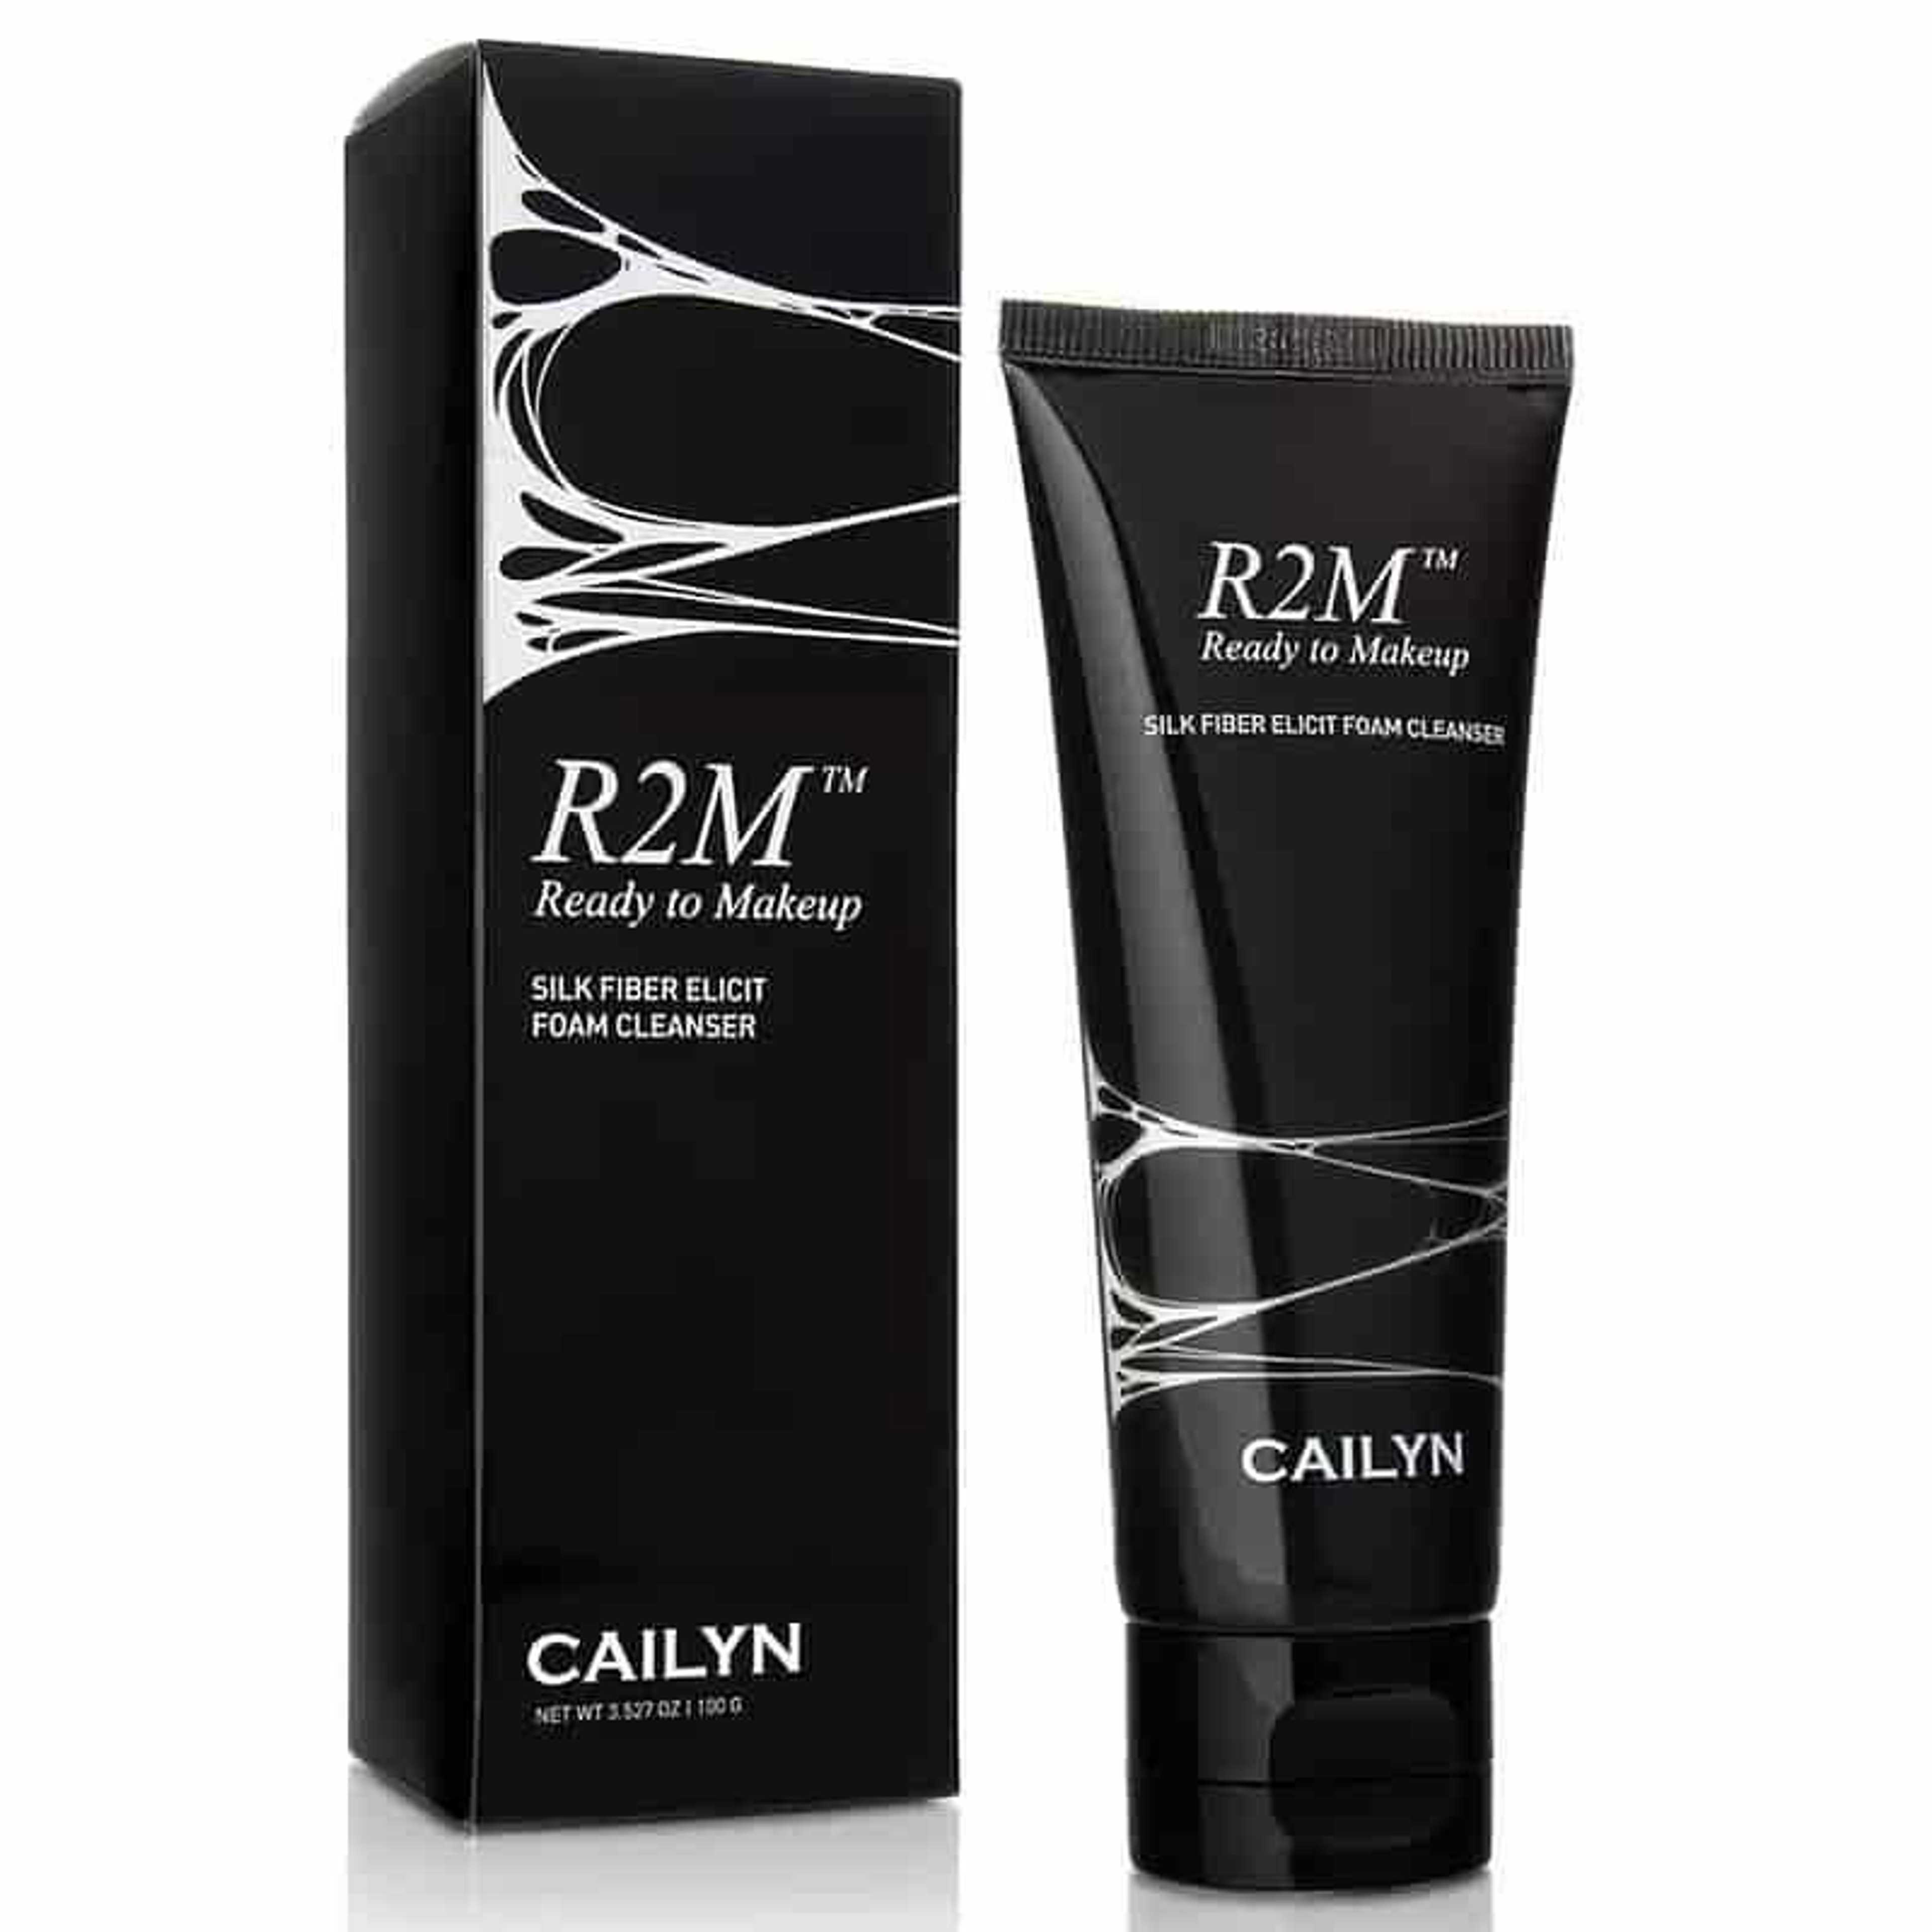 CAILYN R2M Ready to Makeup Silk Fiber Elicit Foam Cleanser 100ml